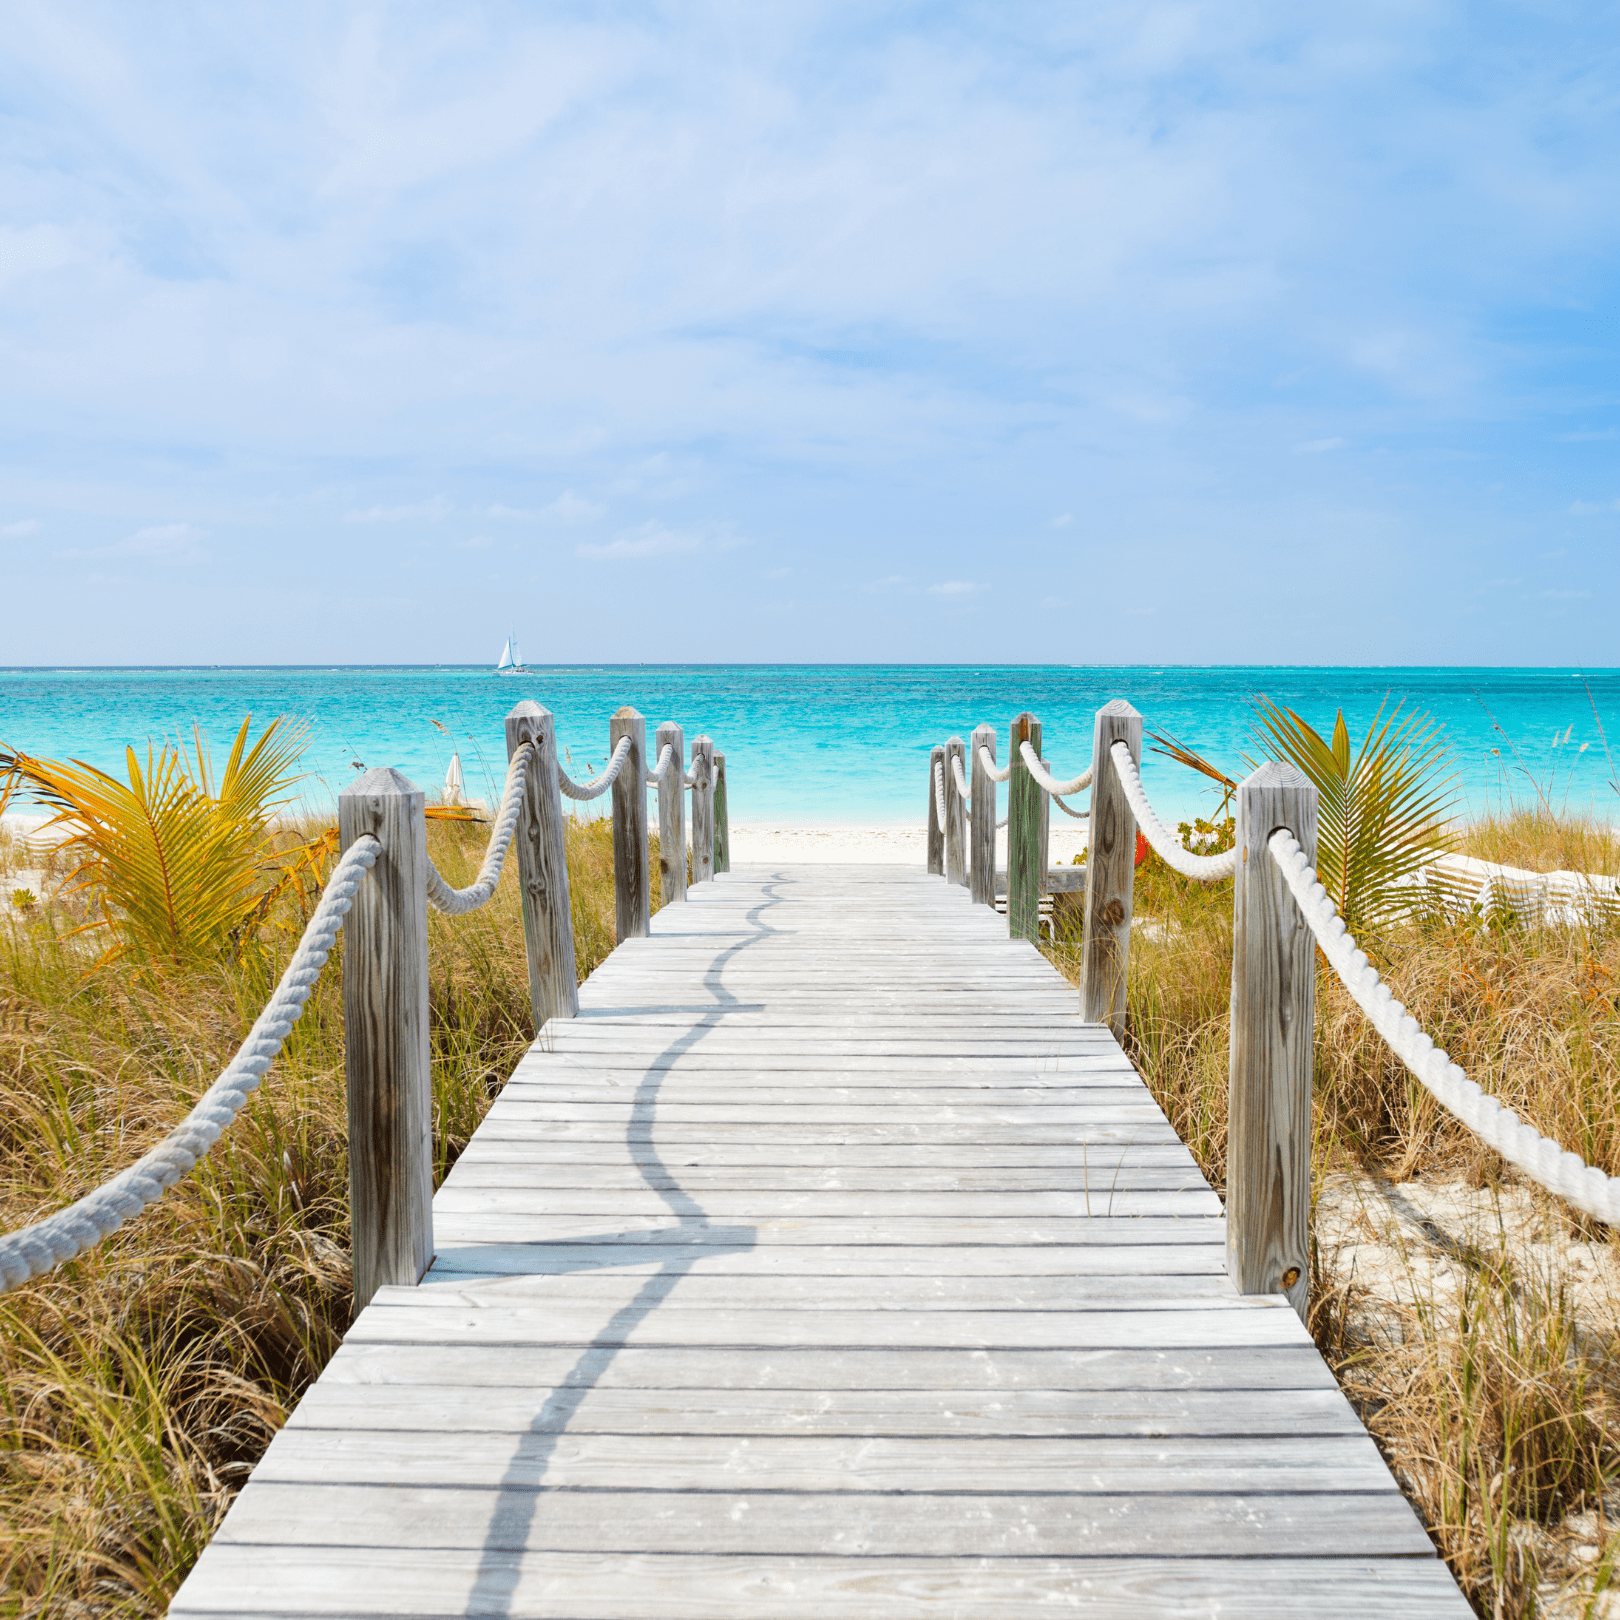 long wooden dock walkway lined with pillars with large rope as handrails leading to the beach off the coast of the Gulf of Mexico